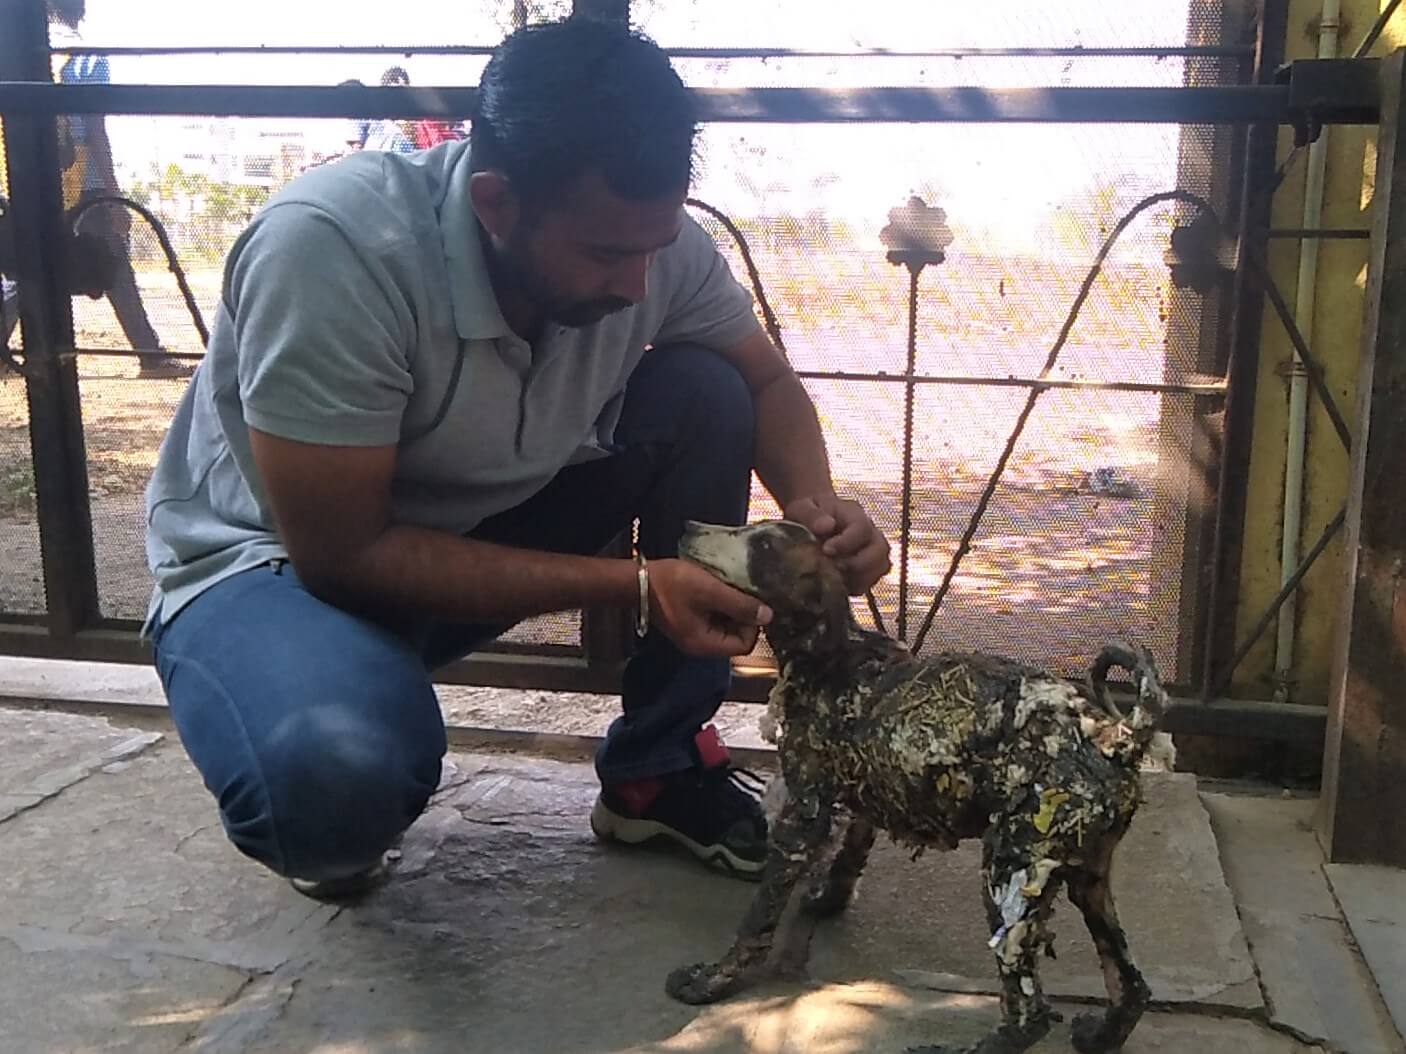 One of Animal Rahat's animal-care experts gives Champi some affectionate head scratches as he examines her.